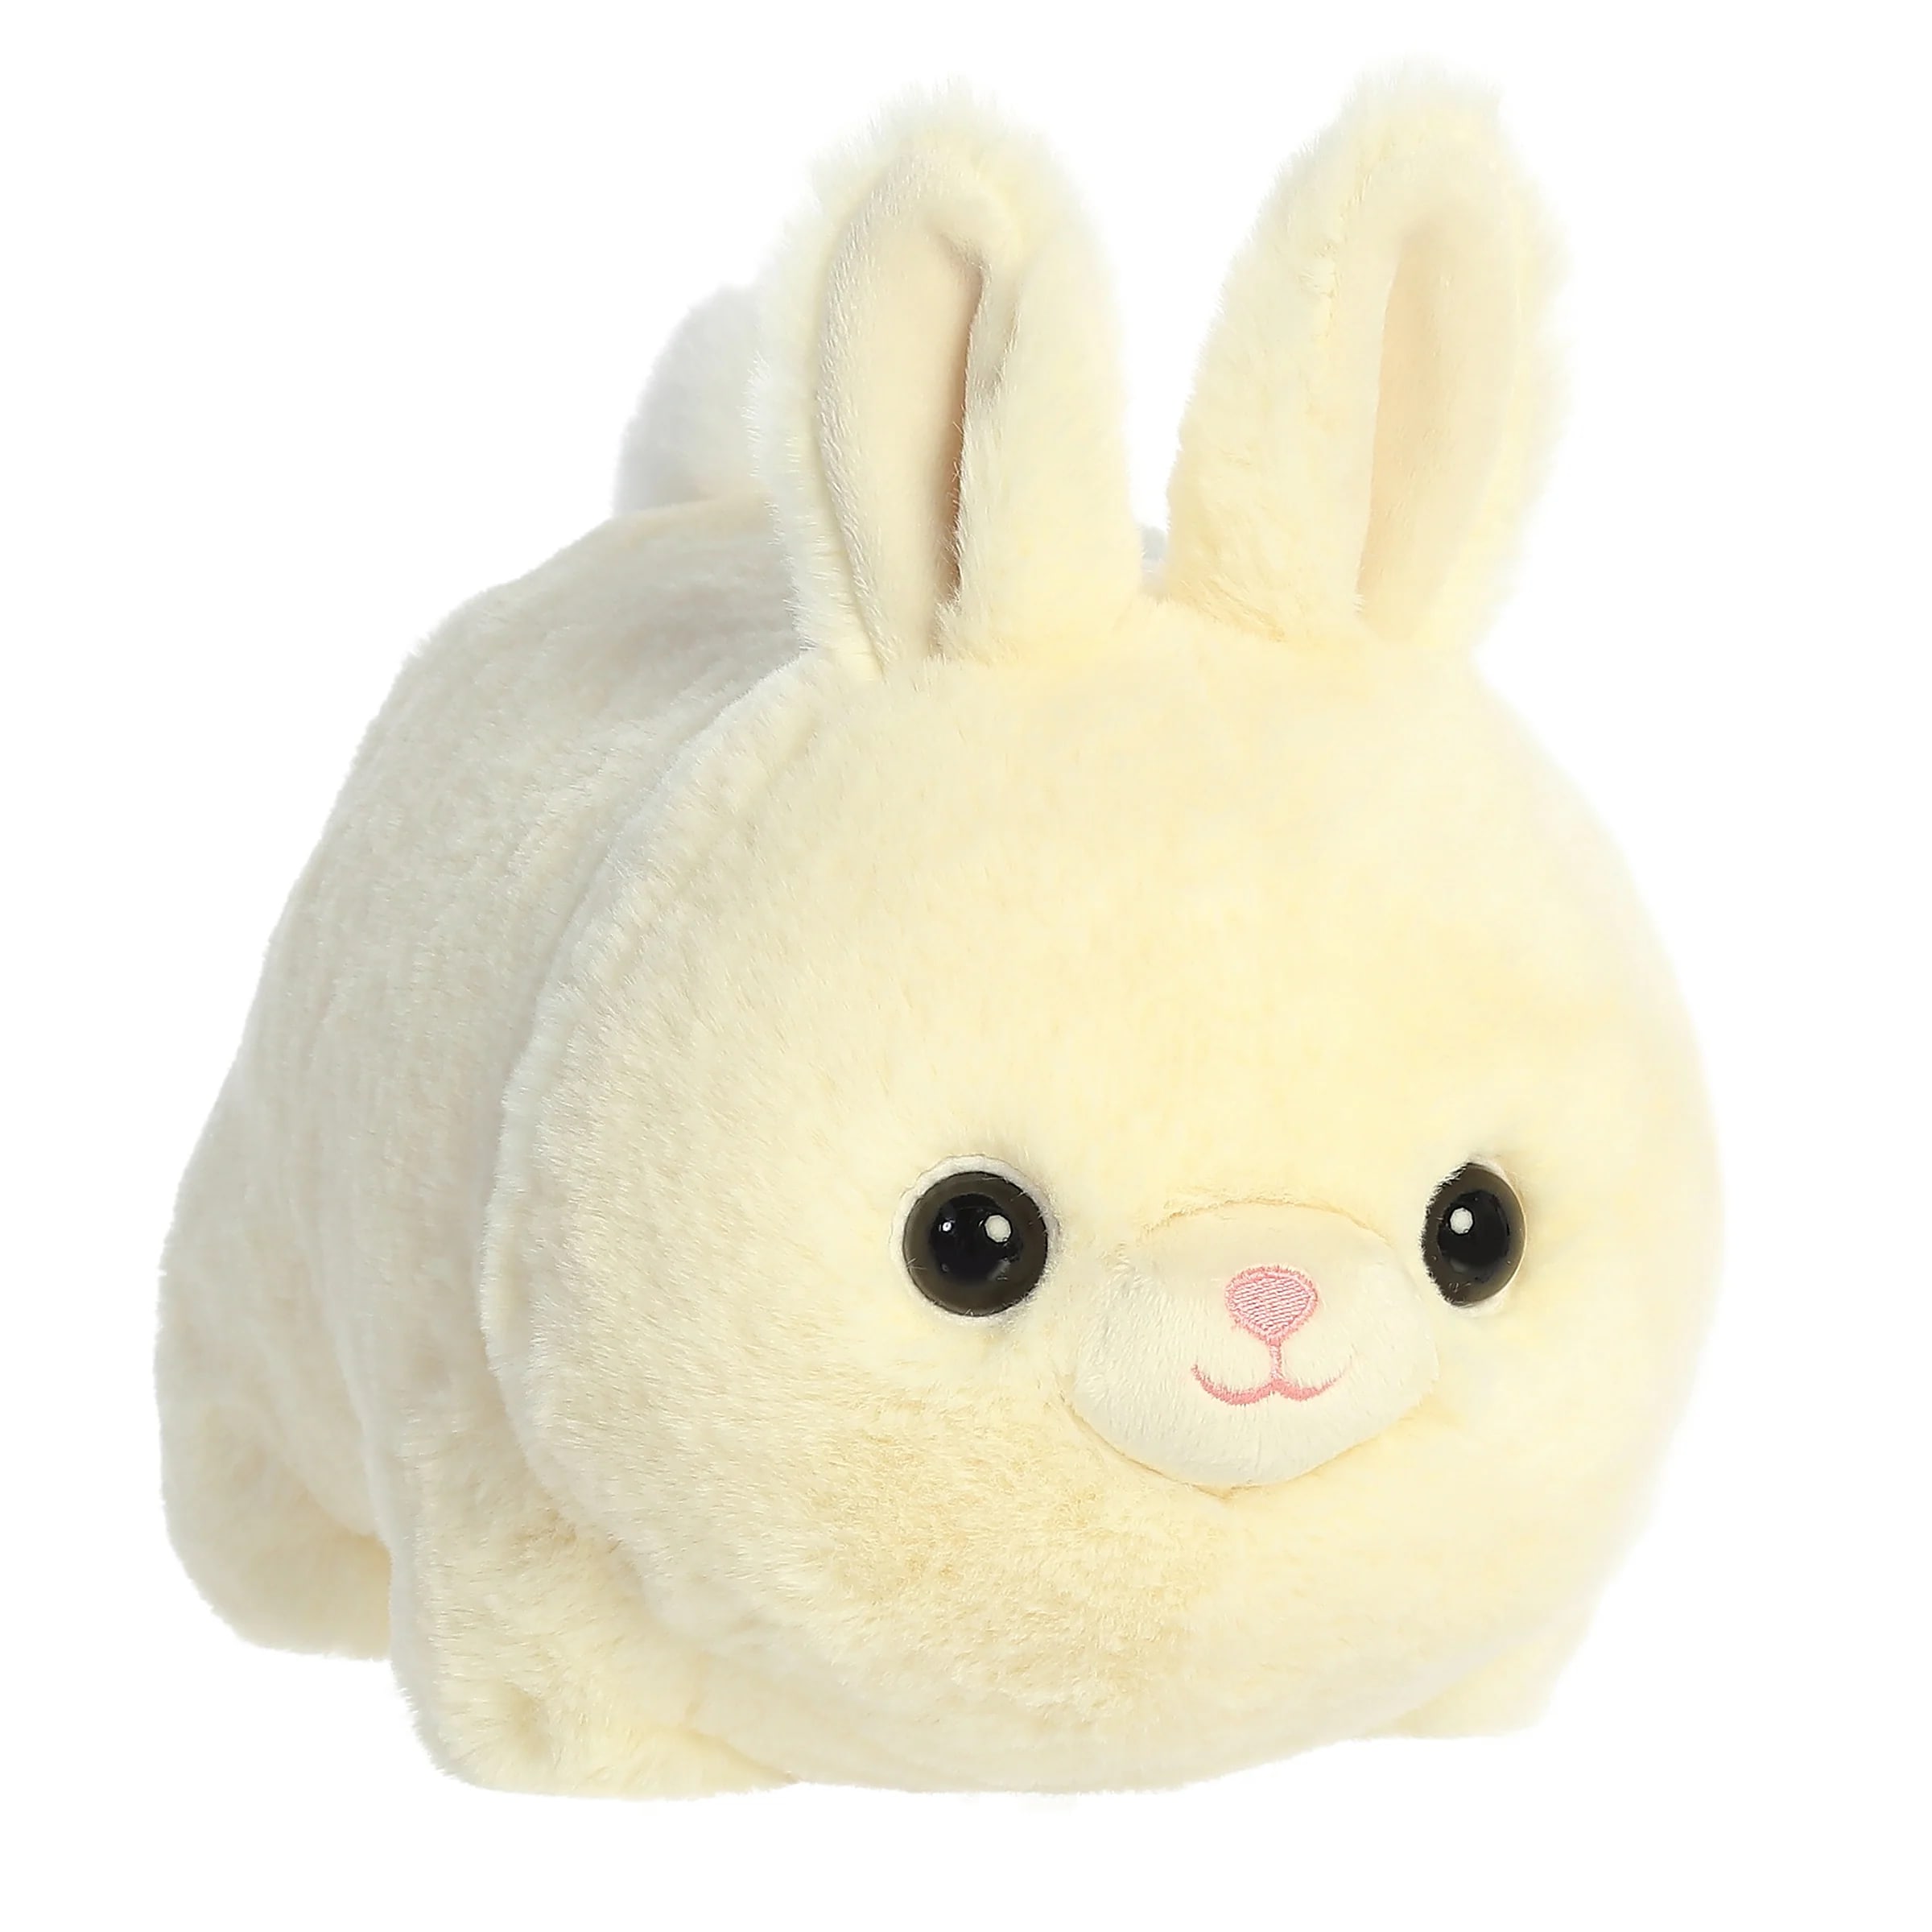 Bunny the Bunny Plush - The Bunny's soft, inviting fur and gentle, loving eyes make it an irresistible companion for anyone looking for a snuggle or a sweet friend to adorn their space. Ideal for gifting or simply as a treat for yourself, this plush pal delights with its cream-colored, potato-shaped body and plush tall ears, perfect for listening to all your stories.  Approximately 10&quot;.